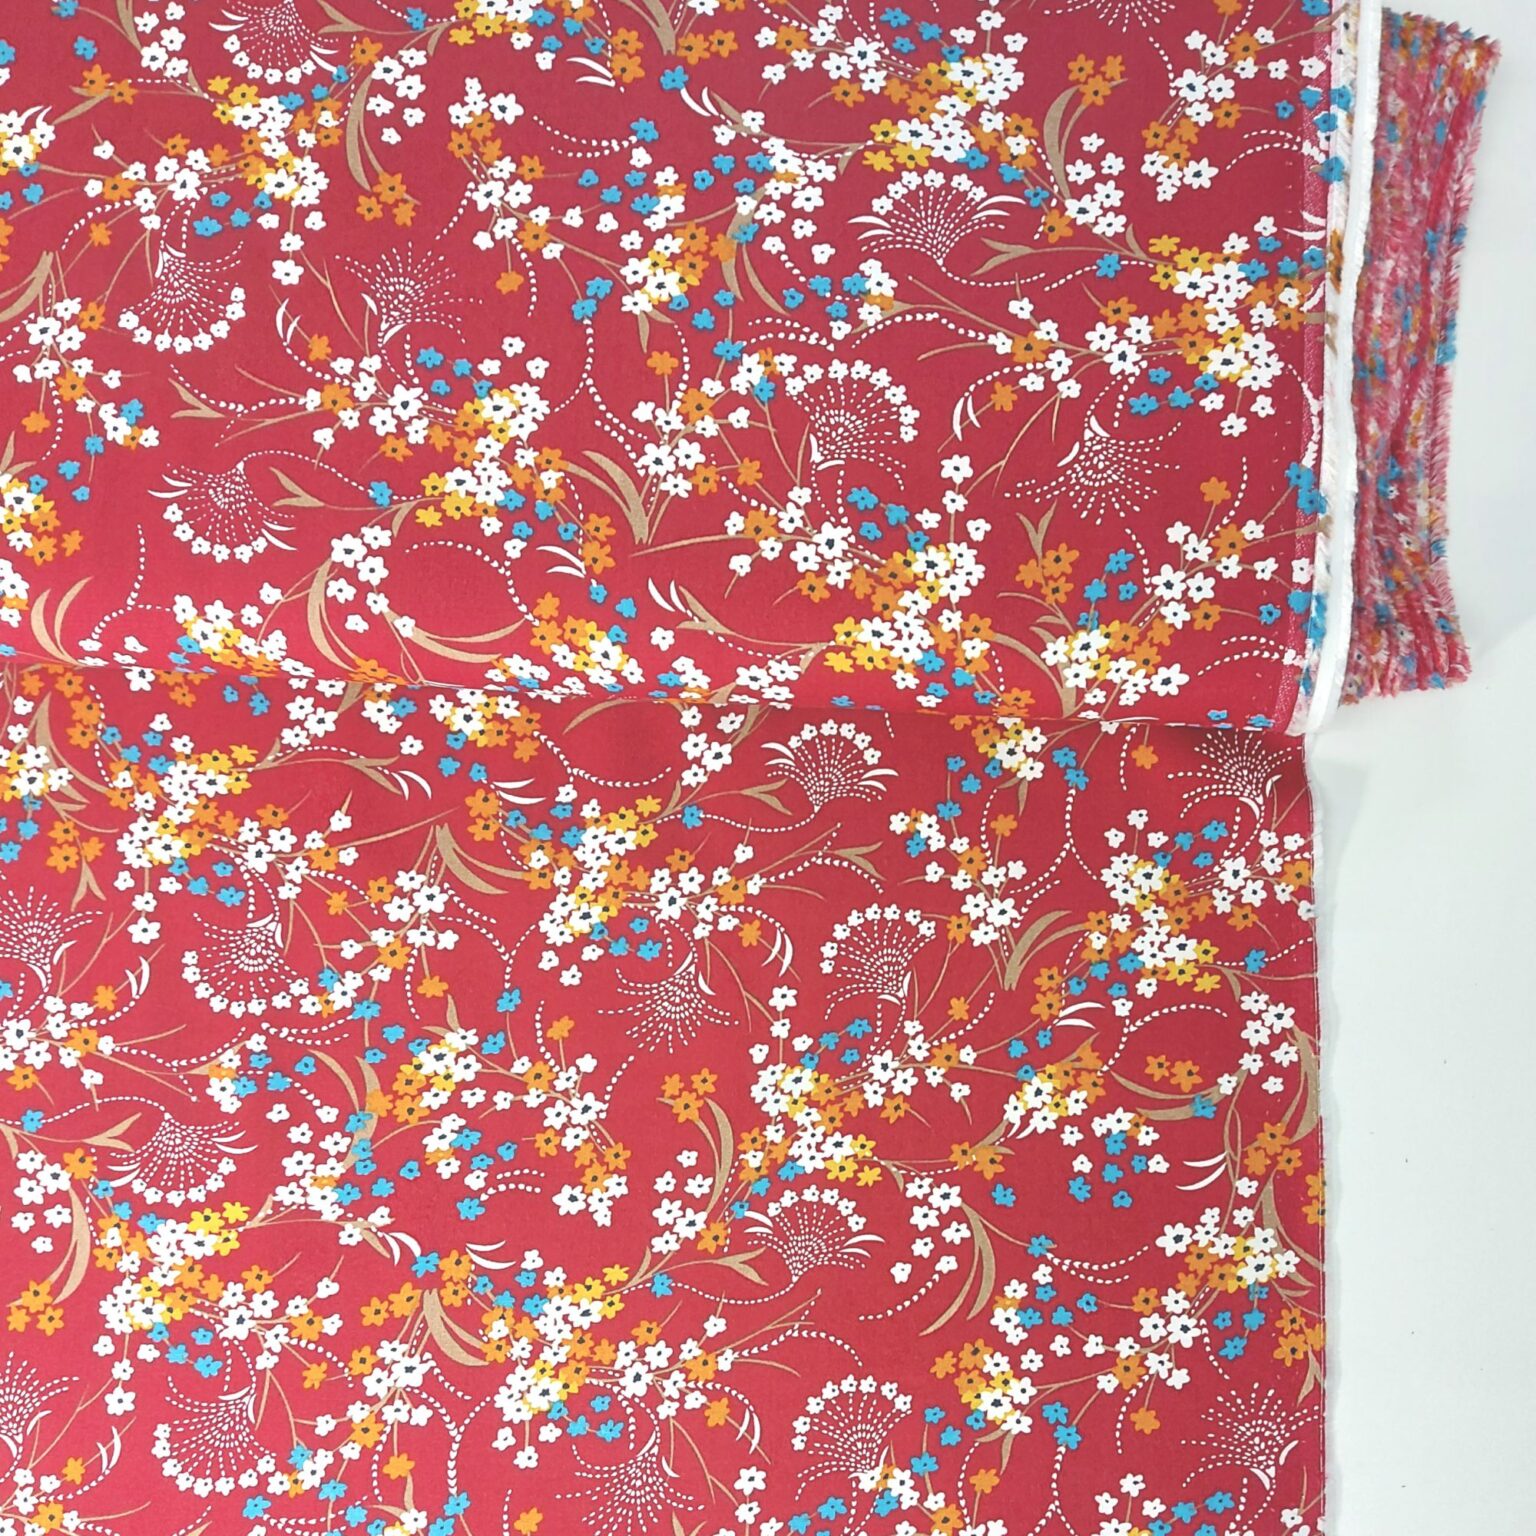 Floral spray on red viscose fabric | More Sewing